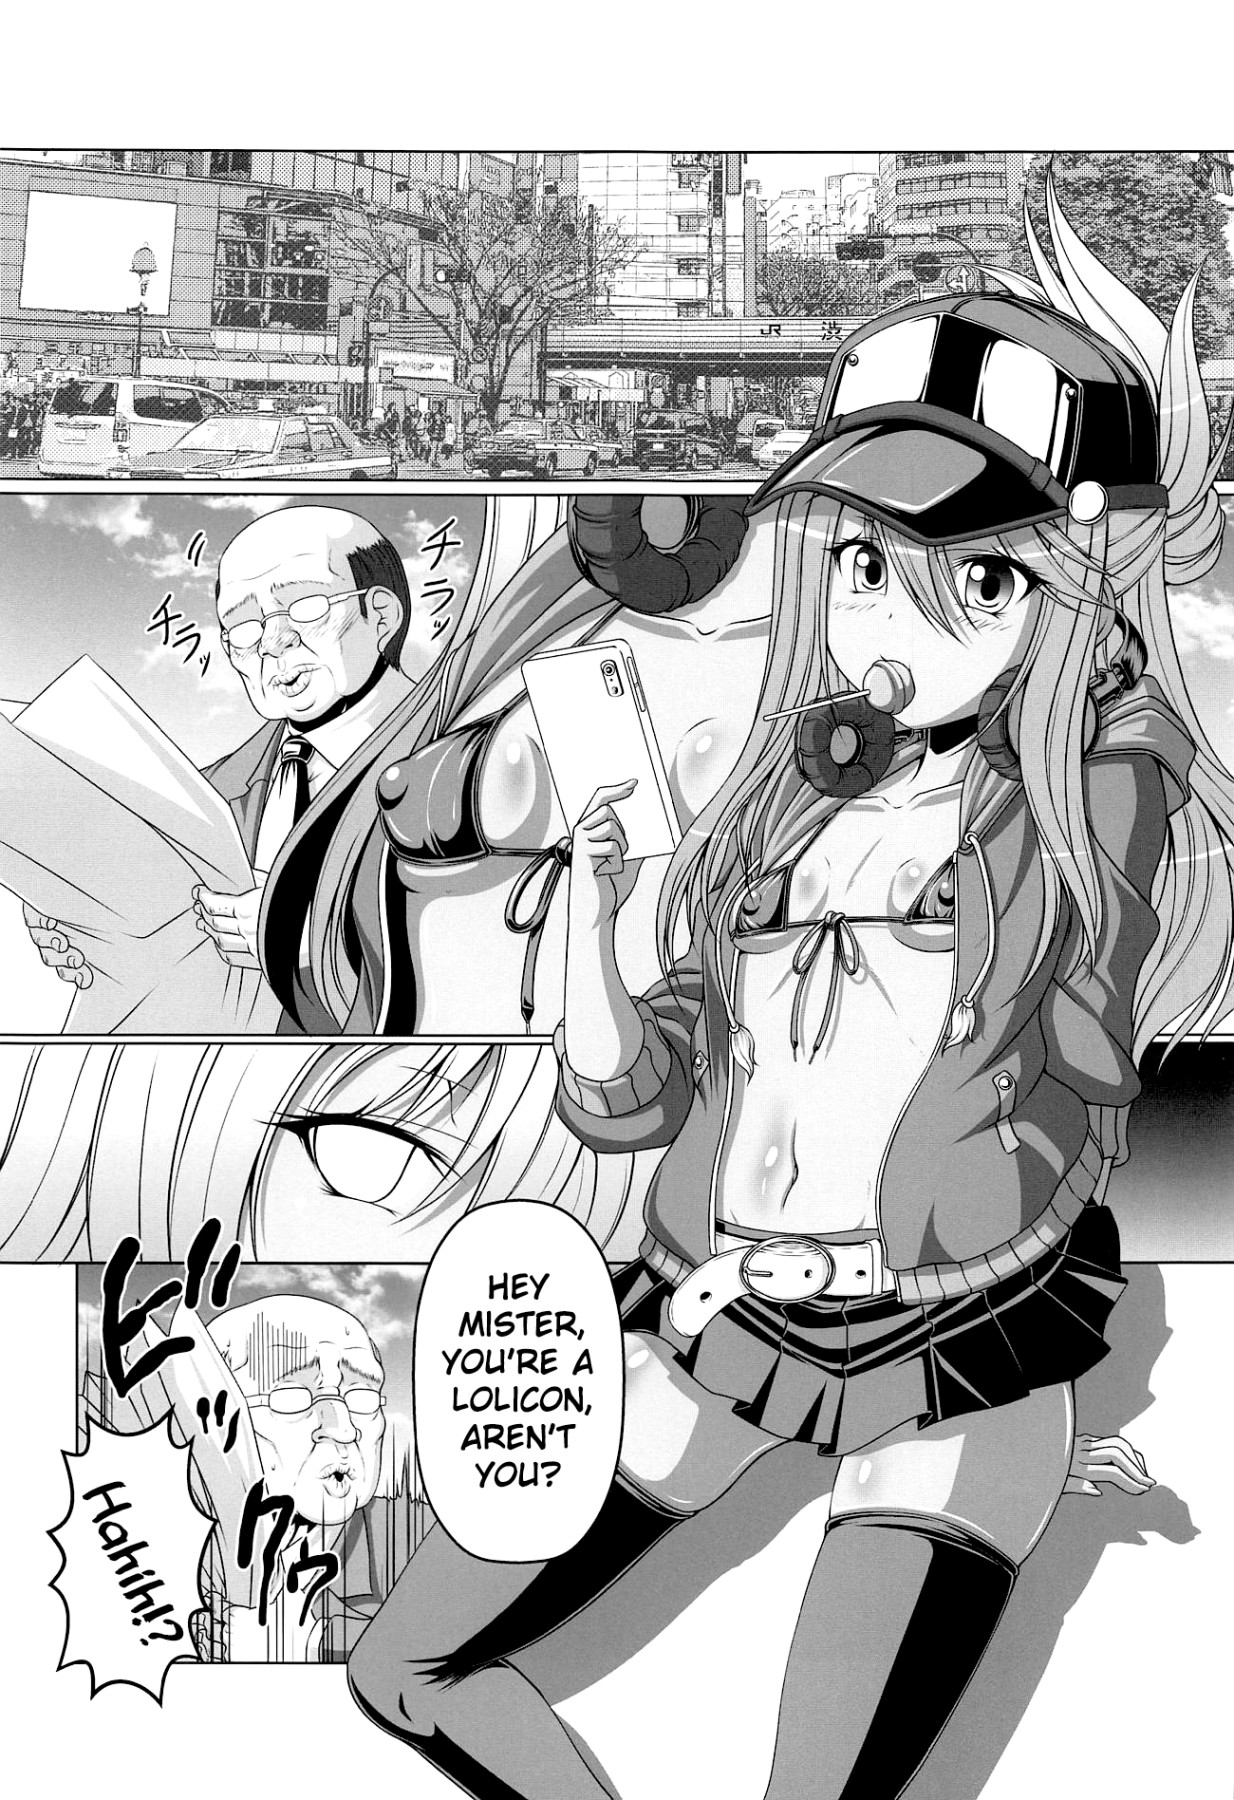 Hentai Manga Comic-HOBBY'S BLOCK!! 28 - A Book About Making A cheeky Girl Obedient By Capturing Her With Pleasure Through Drugs-Read-2